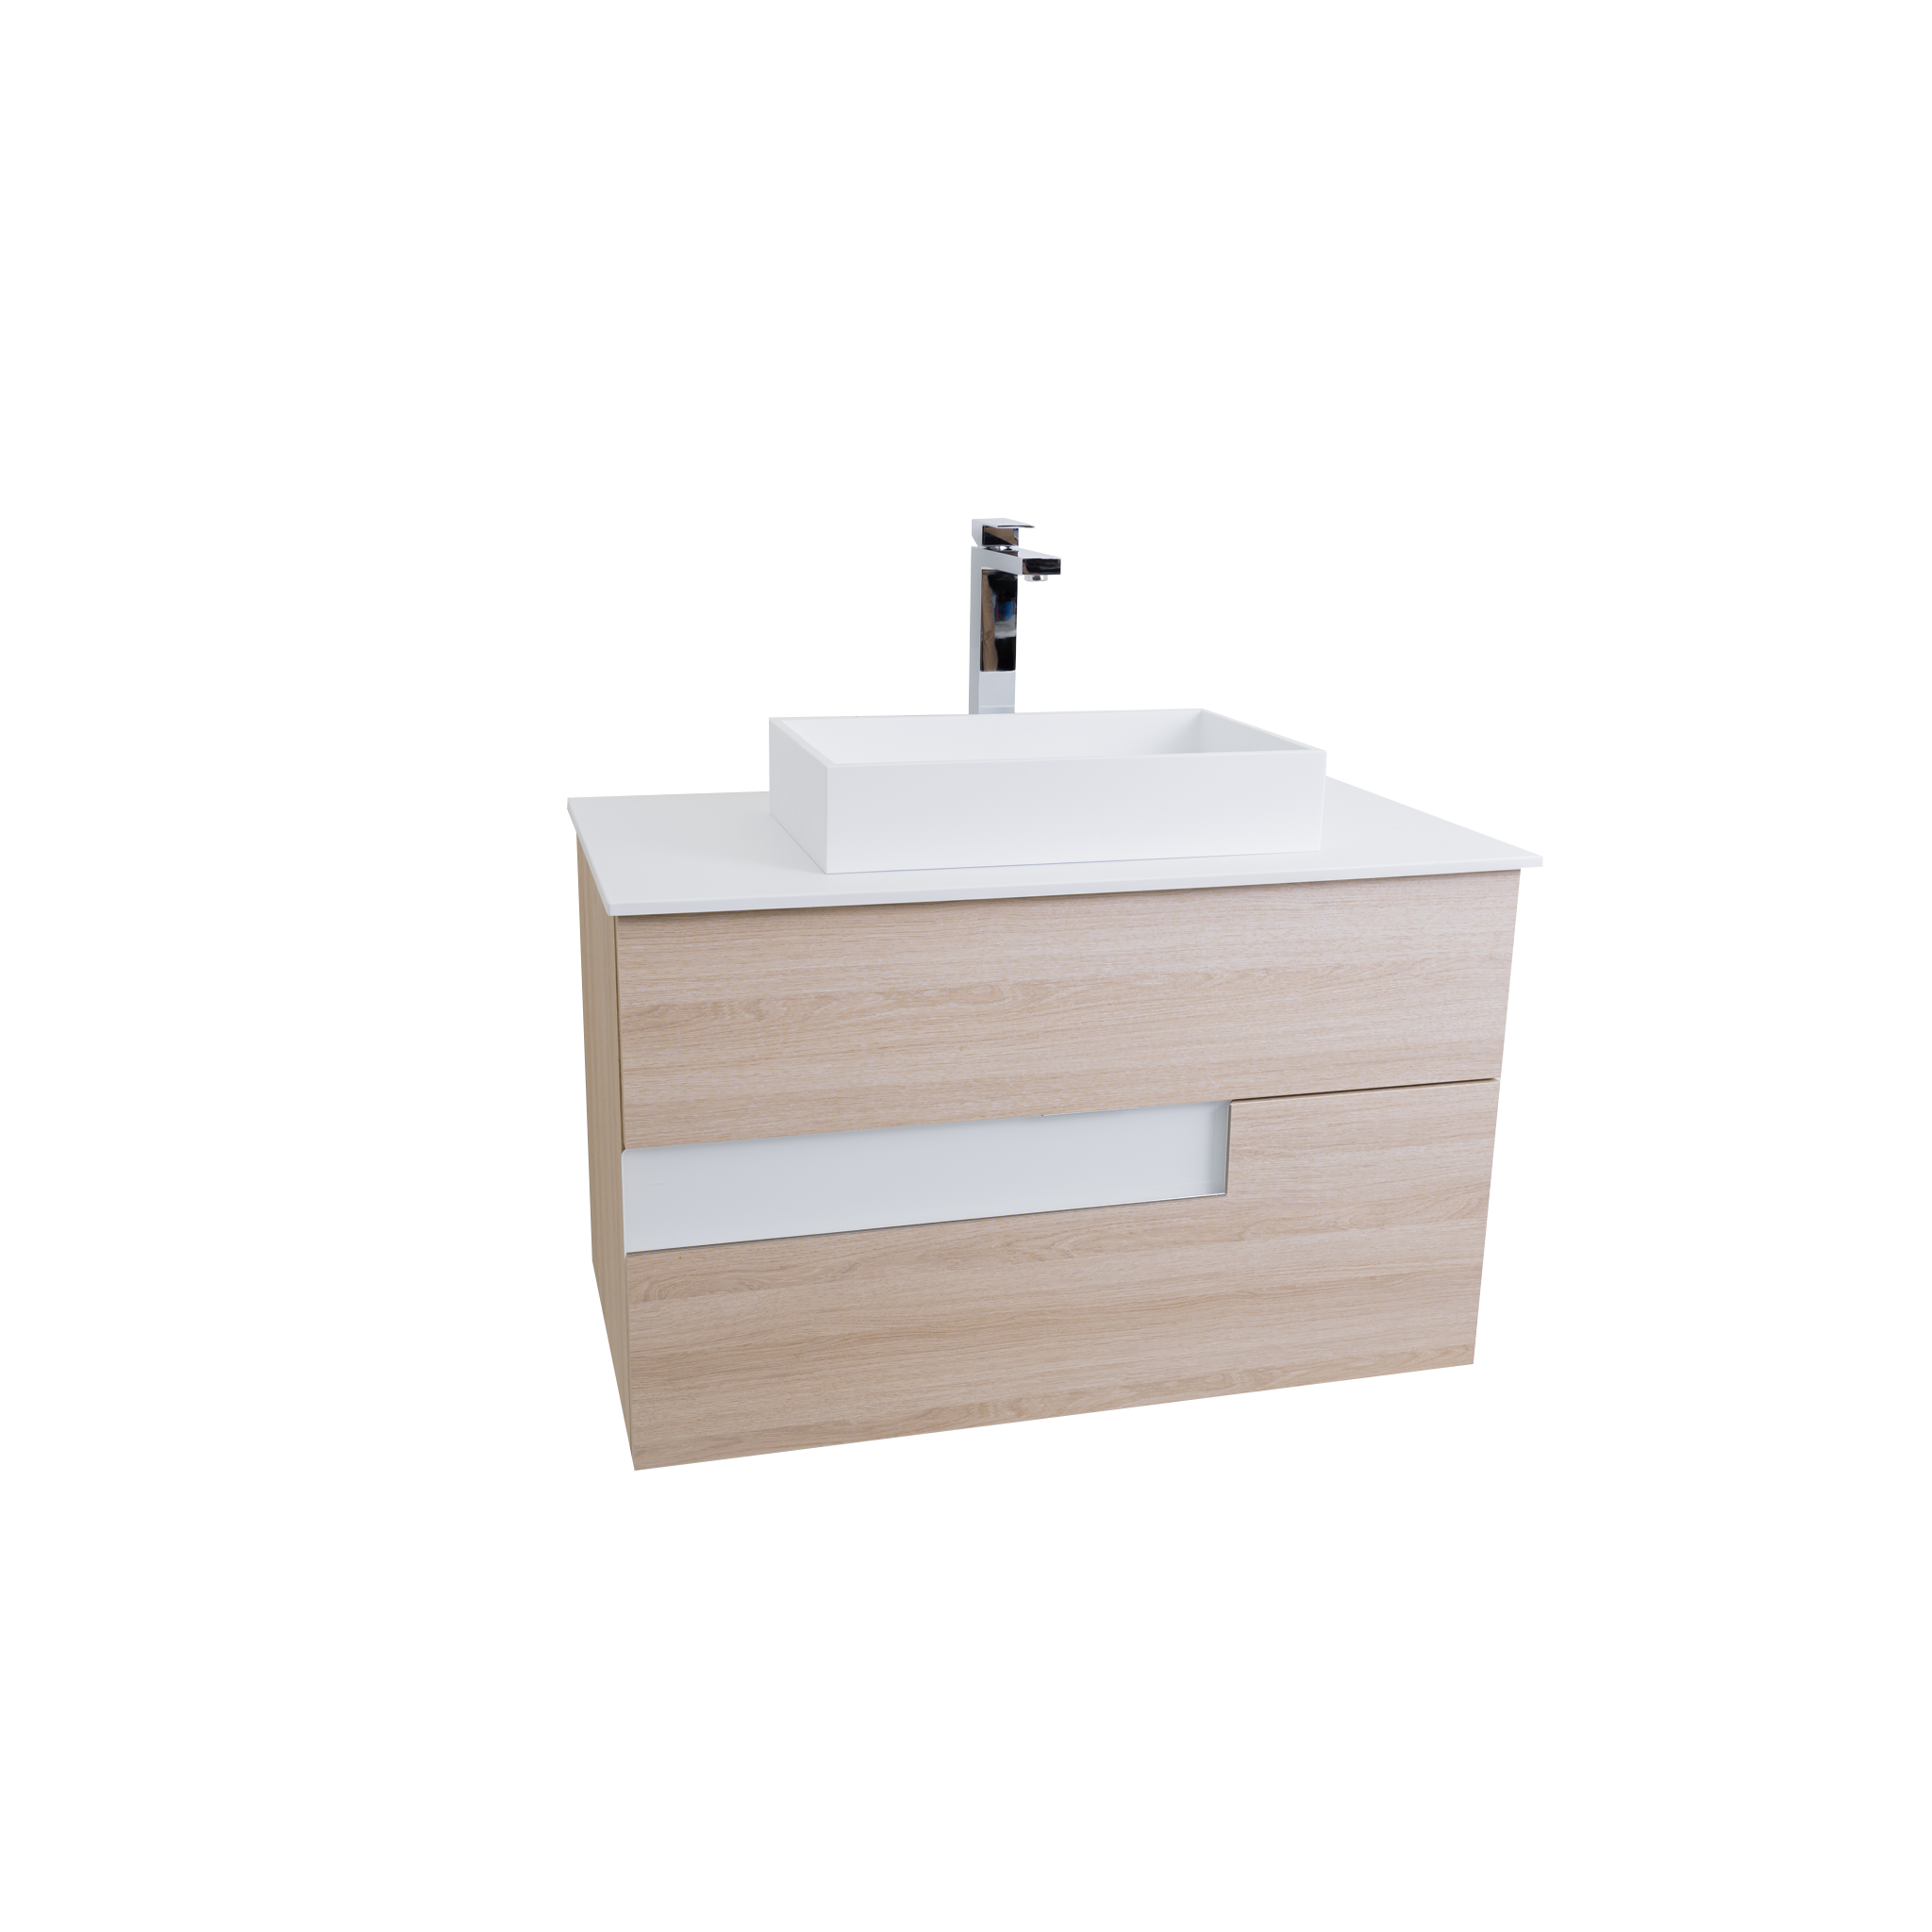 Vision 35.5 Natural Light Wood Cabinet, Solid Surface Flat White Counter And Infinity Square Solid Surface White Basin 1329, Wall Mounted Modern Vanity Set